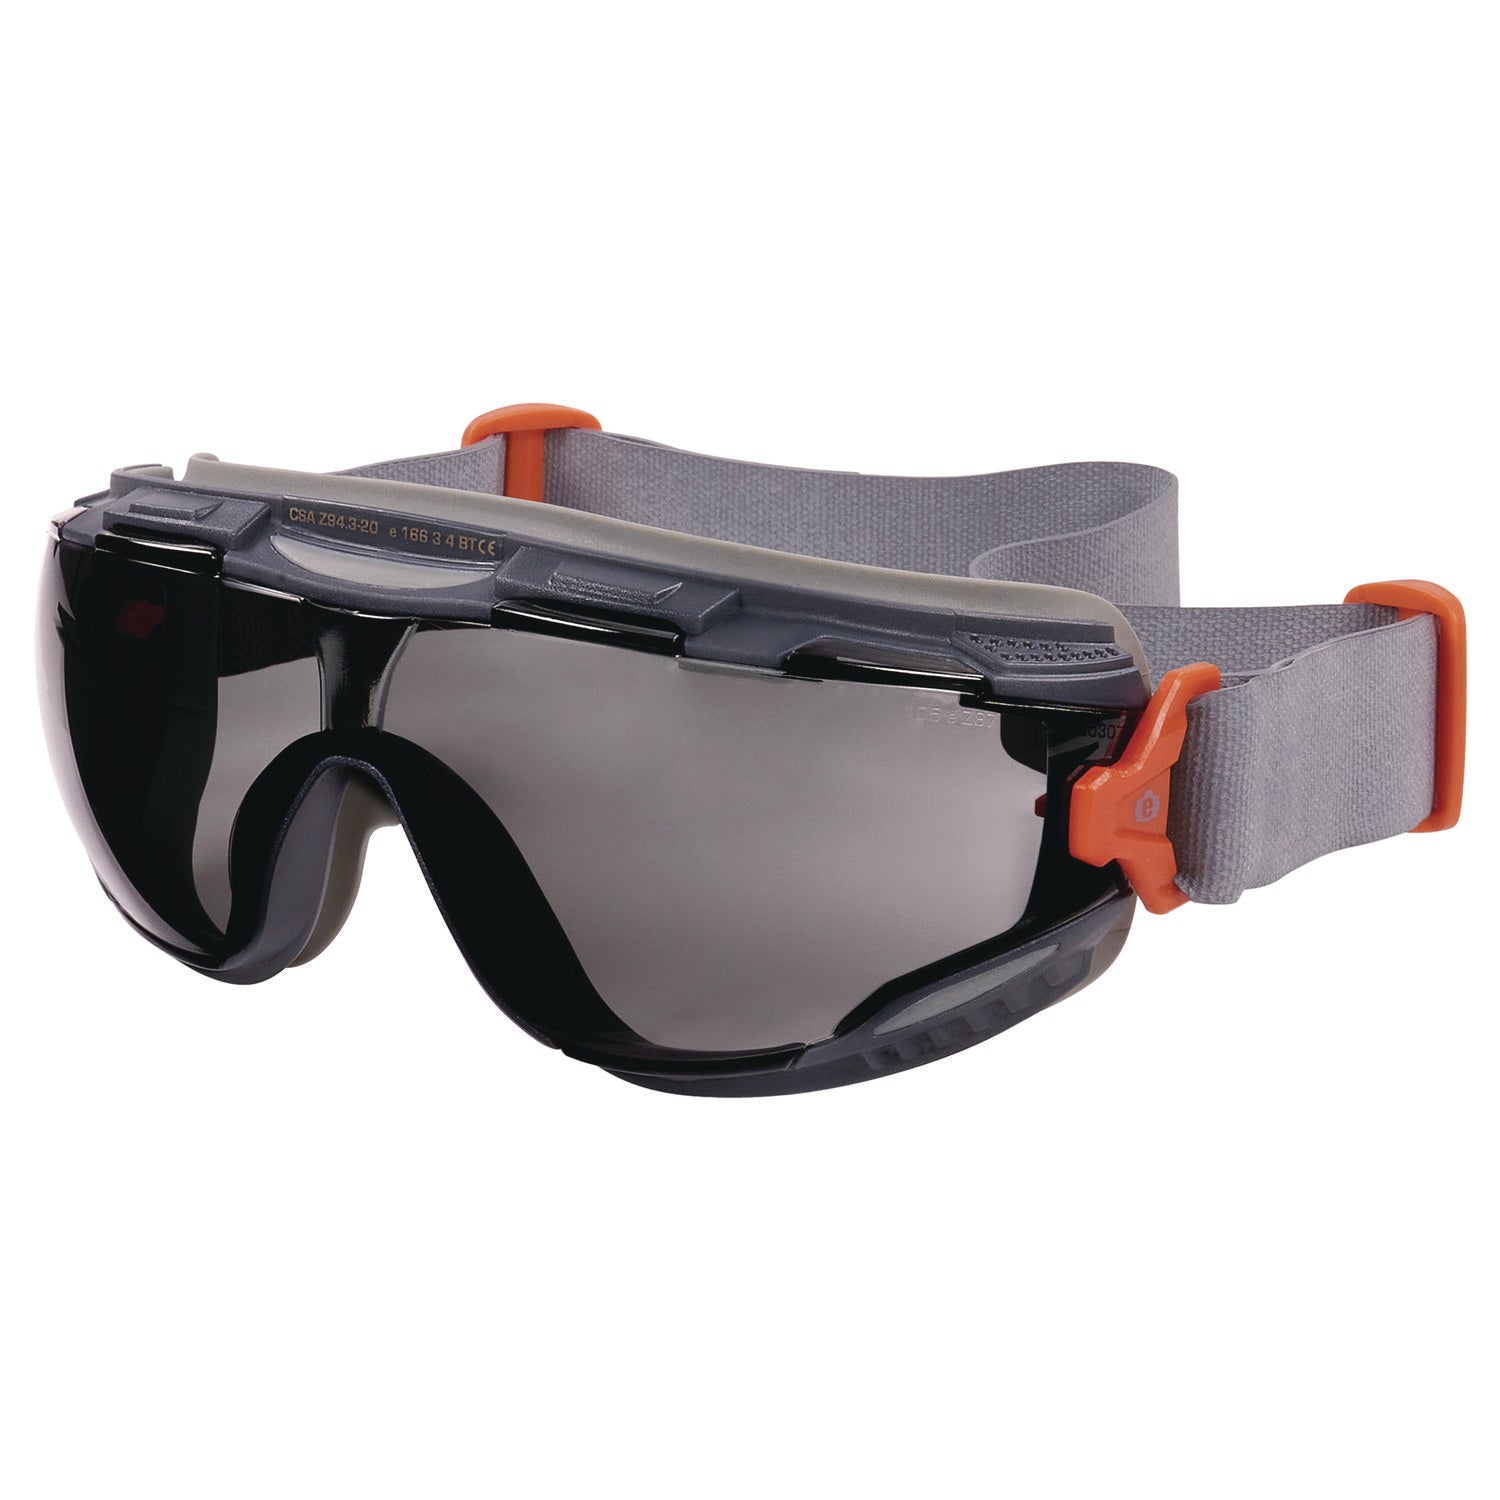 skullerz-arkyn-anti-scratch-and-enhanced-anti-fog-safety-goggles-with-neoprene-strap-smoke-ships-in-1-3-business-days_ego60311 - 1